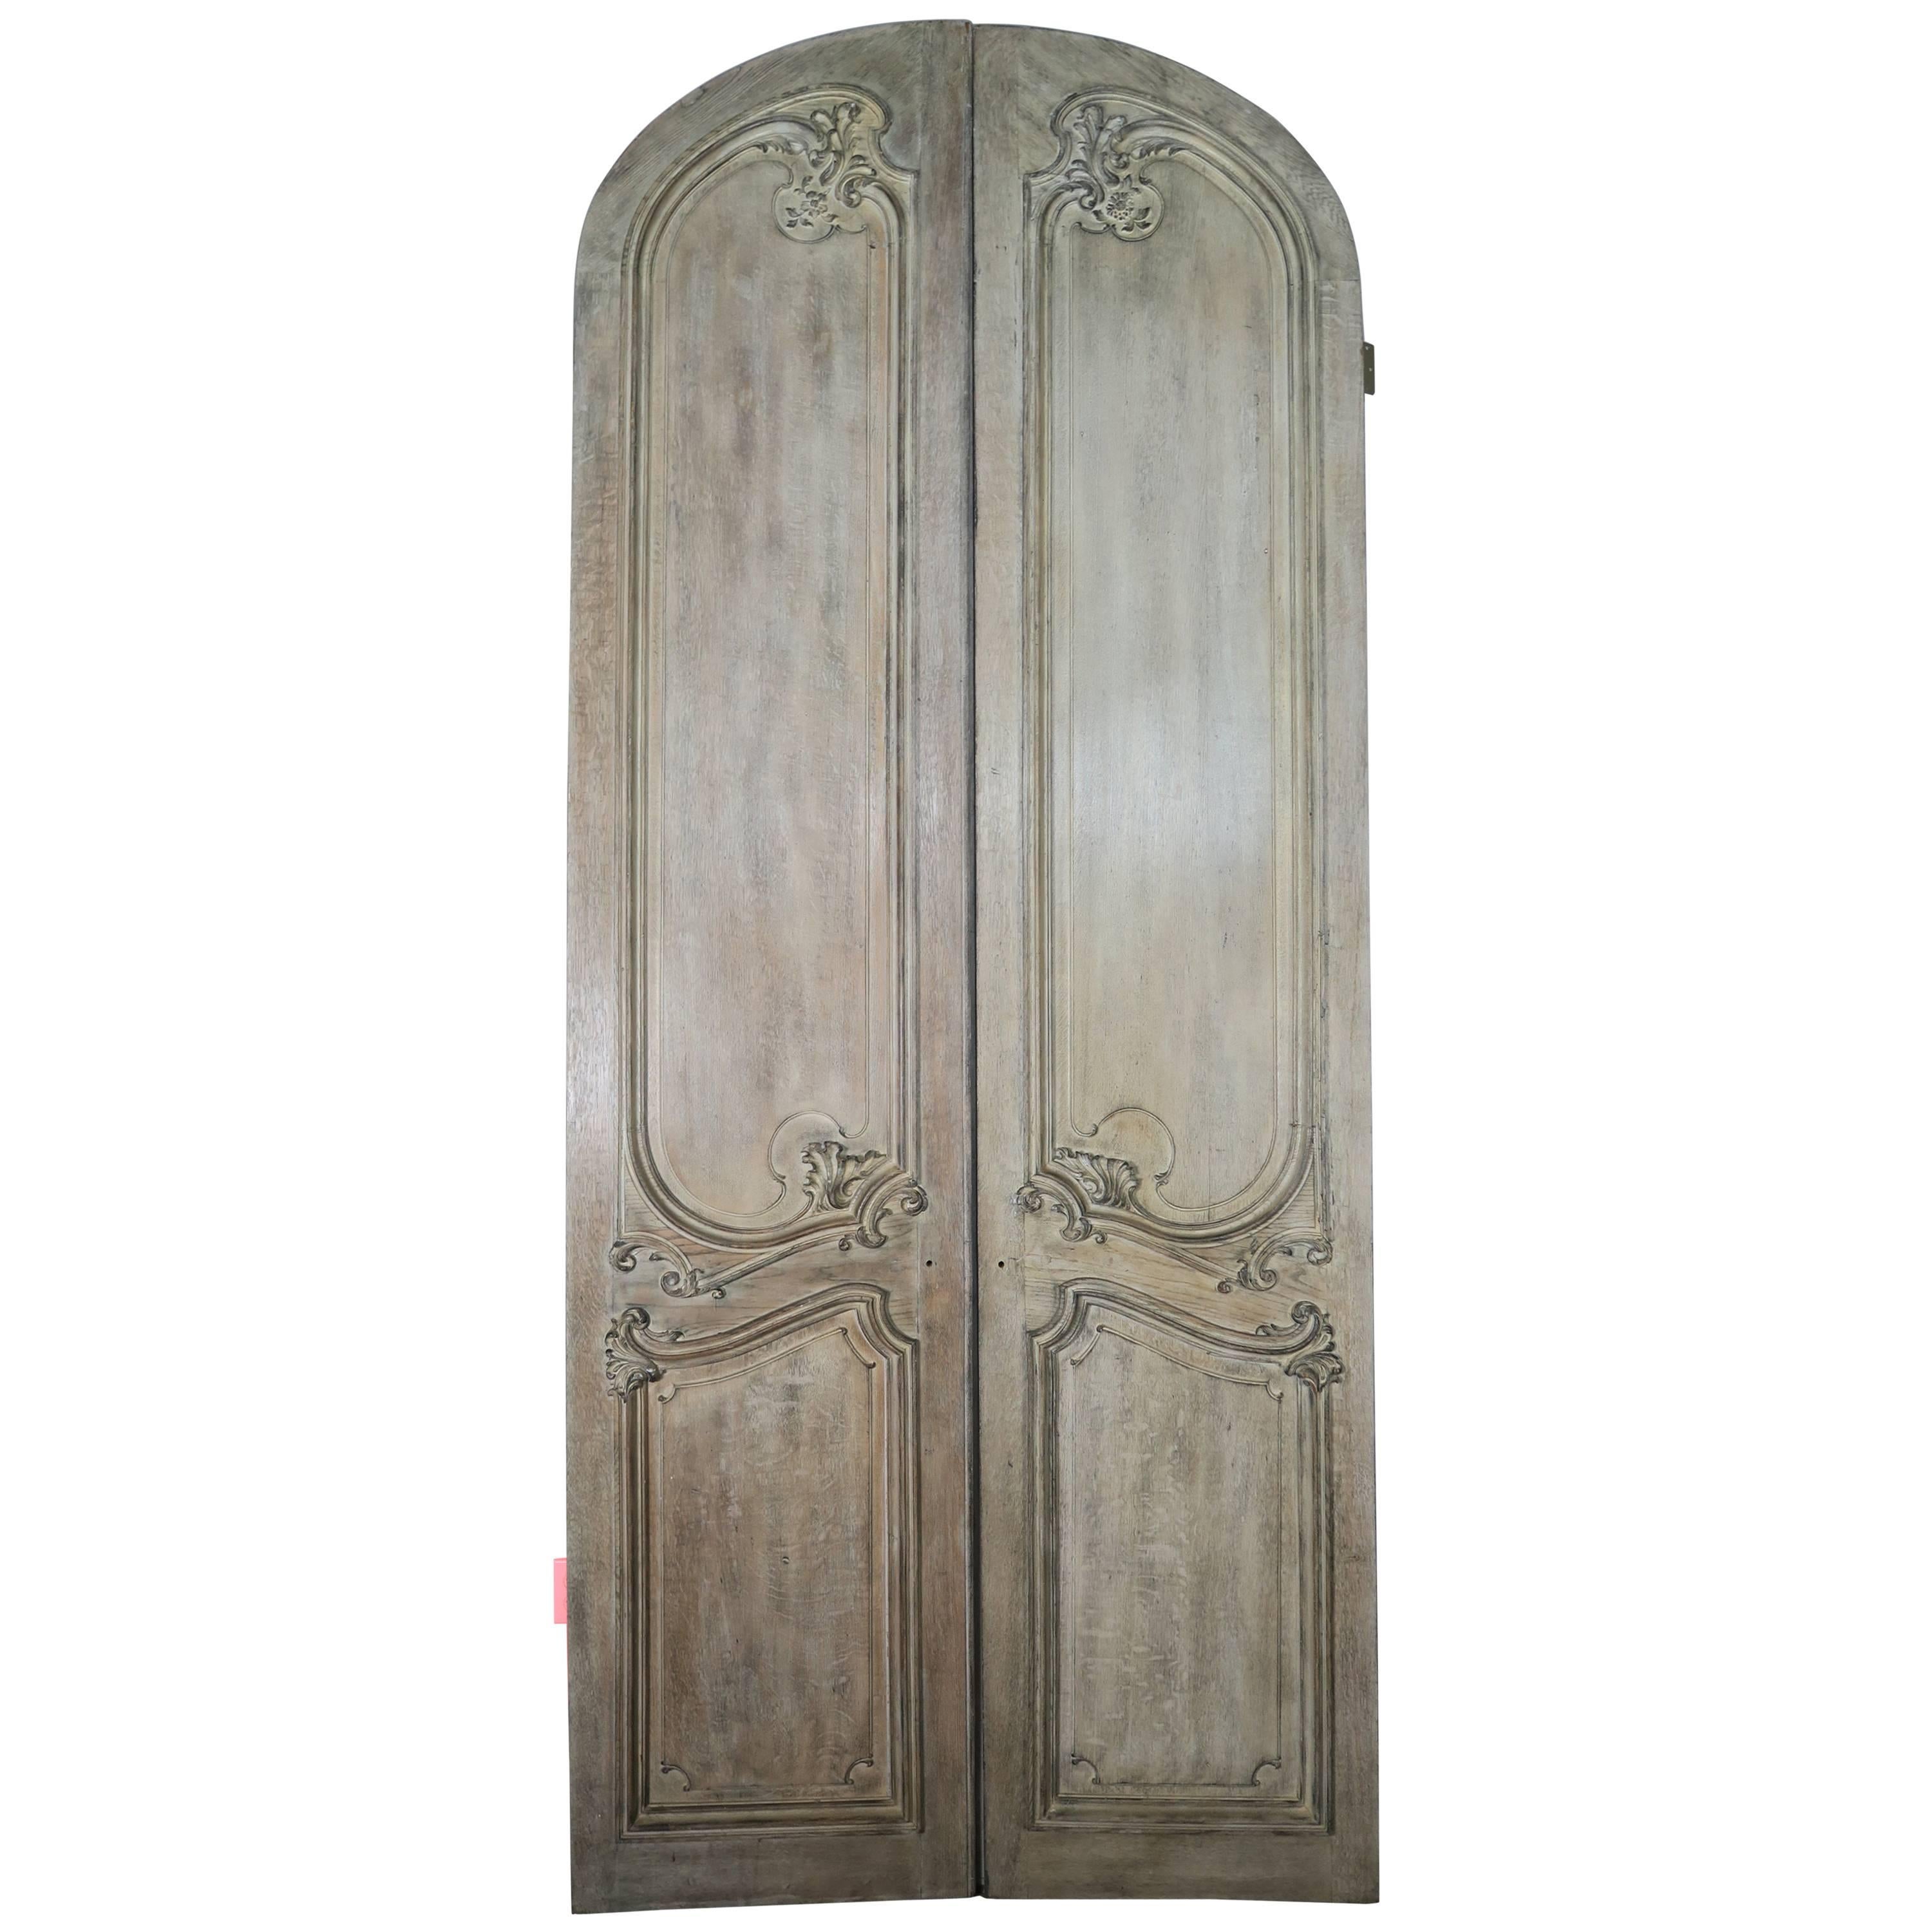 Monumental Pair of French Carved Painted Doors, circa 1900s